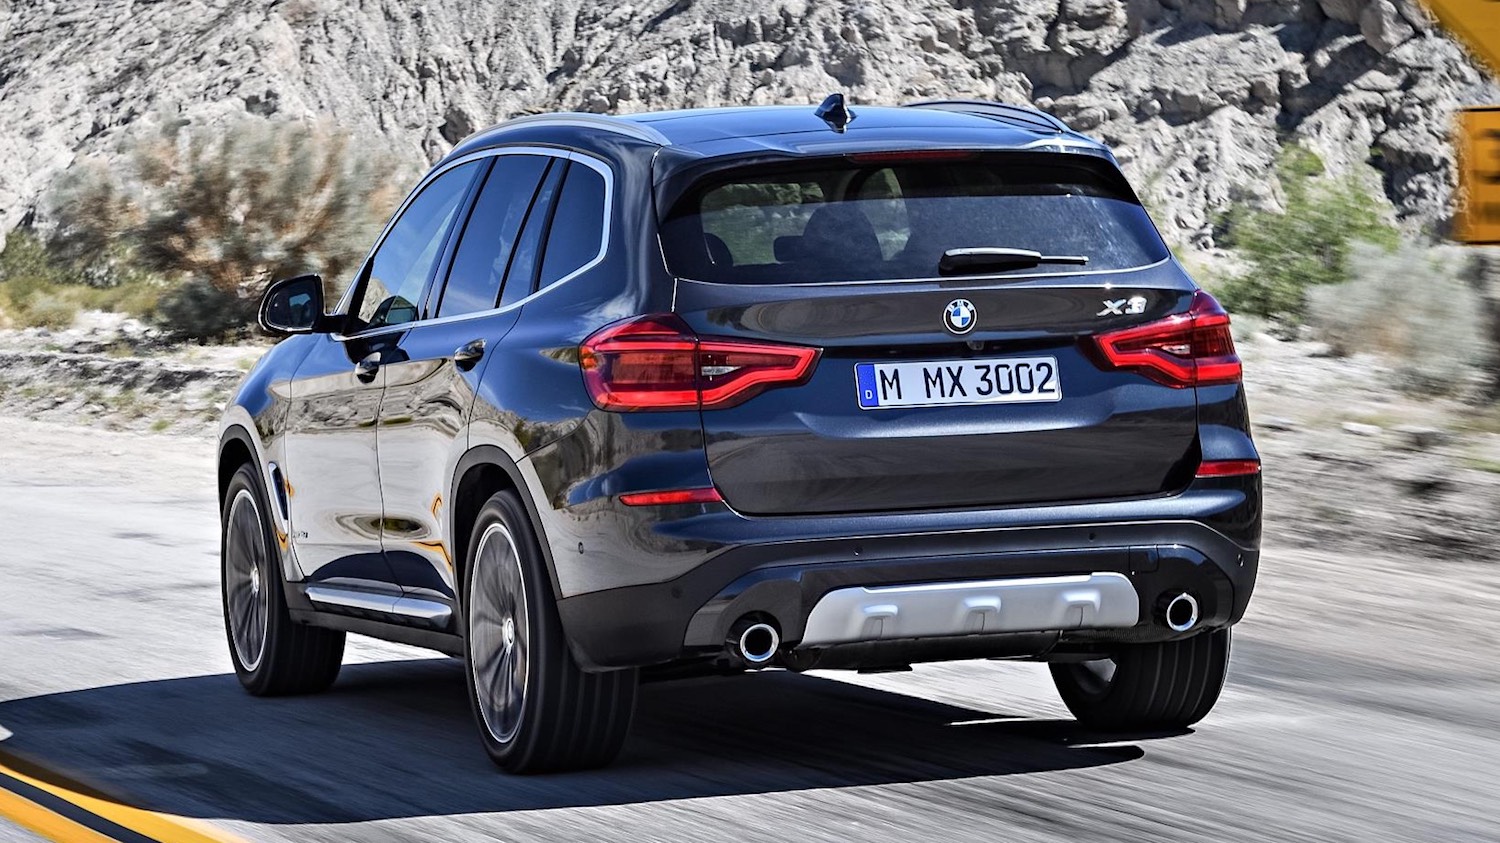 Neil Lyndon takes a spin in the latest BMW X3 M-Sport 1